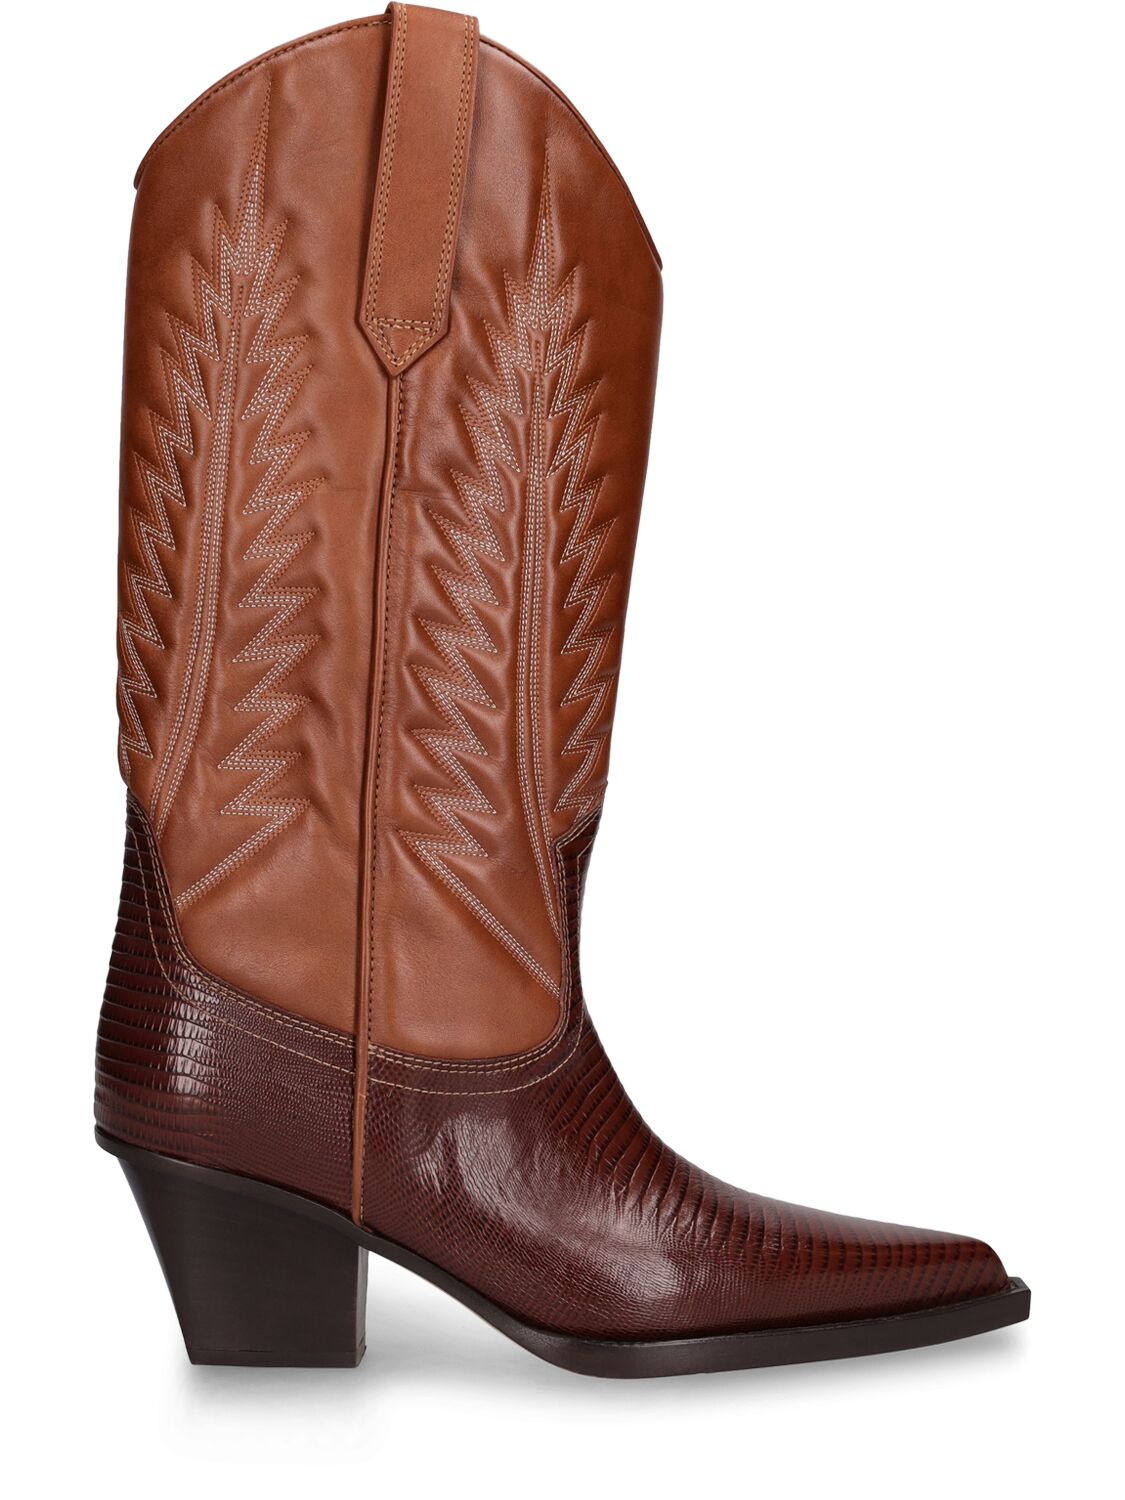 PARIS TEXAS Slouchy Lizard-Embossed Leather Mid-Calf Boots